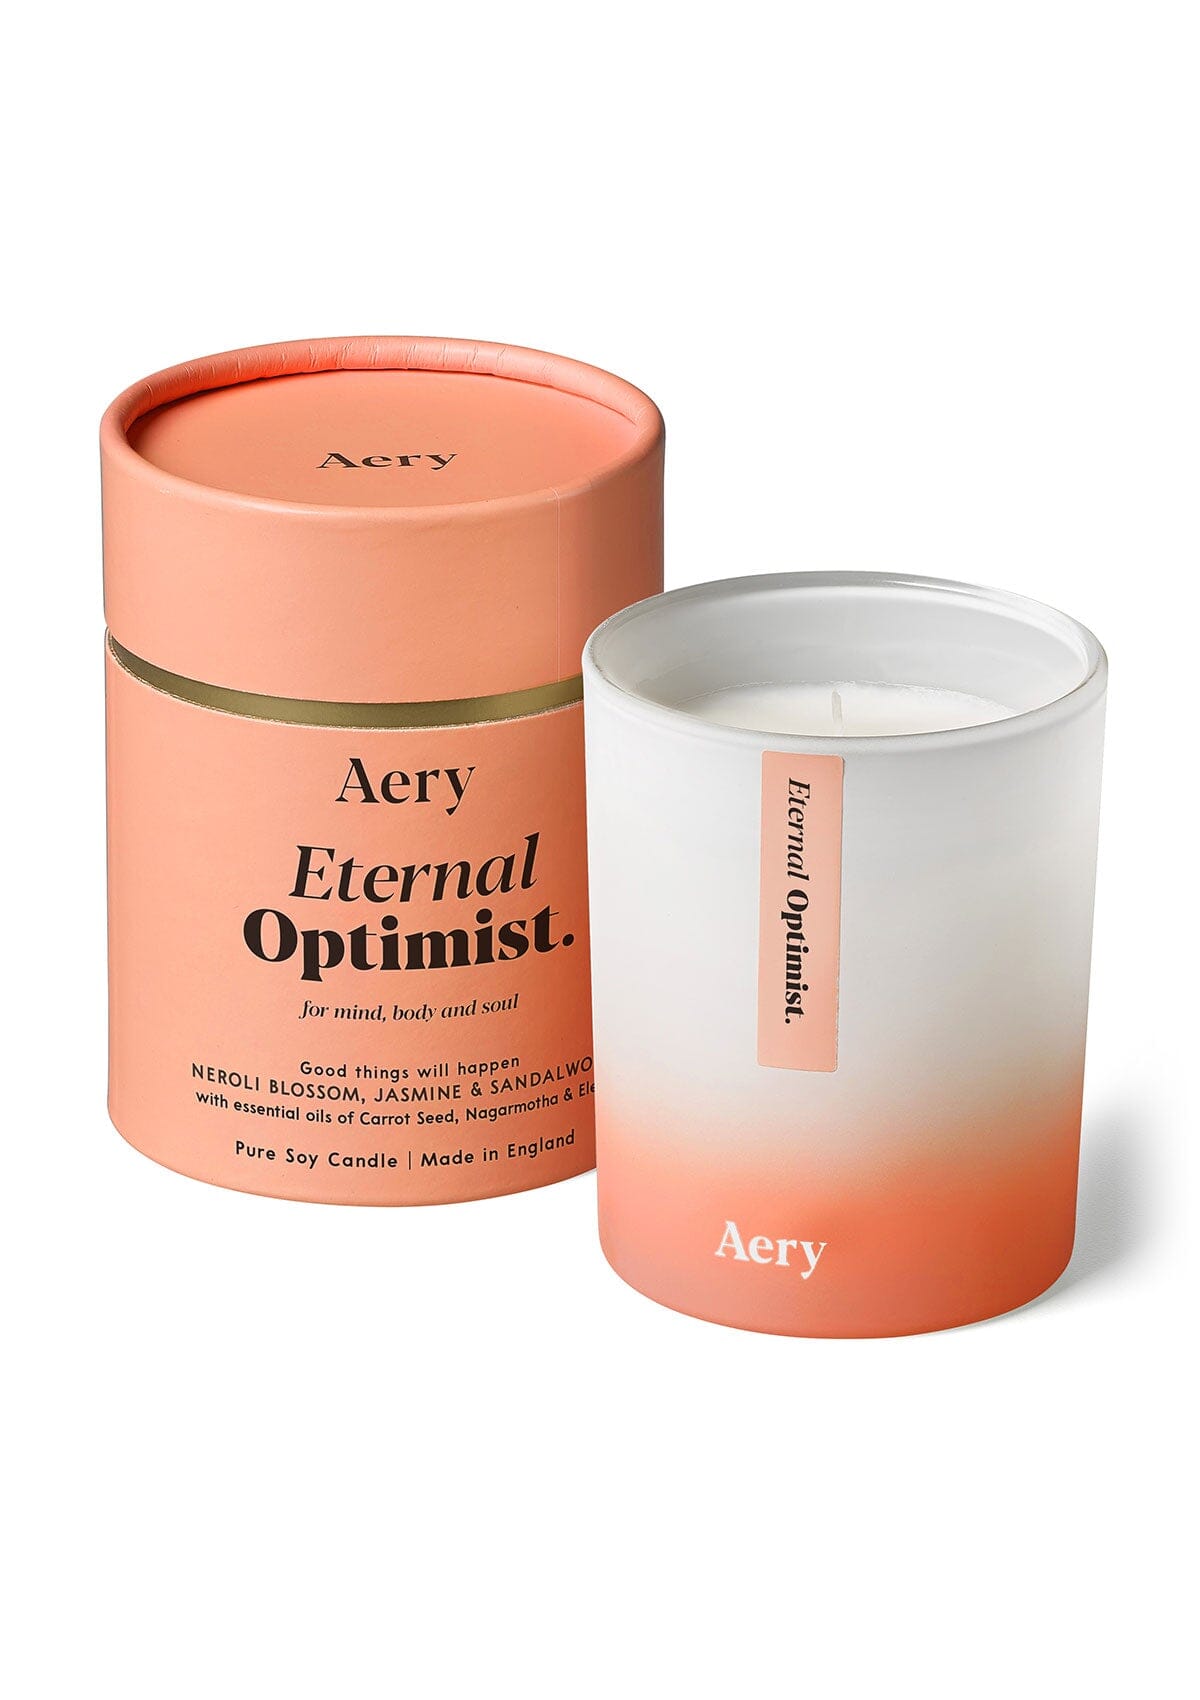 Orange Eternal Optimist candle by Aery displayed next to product packaging on white background 